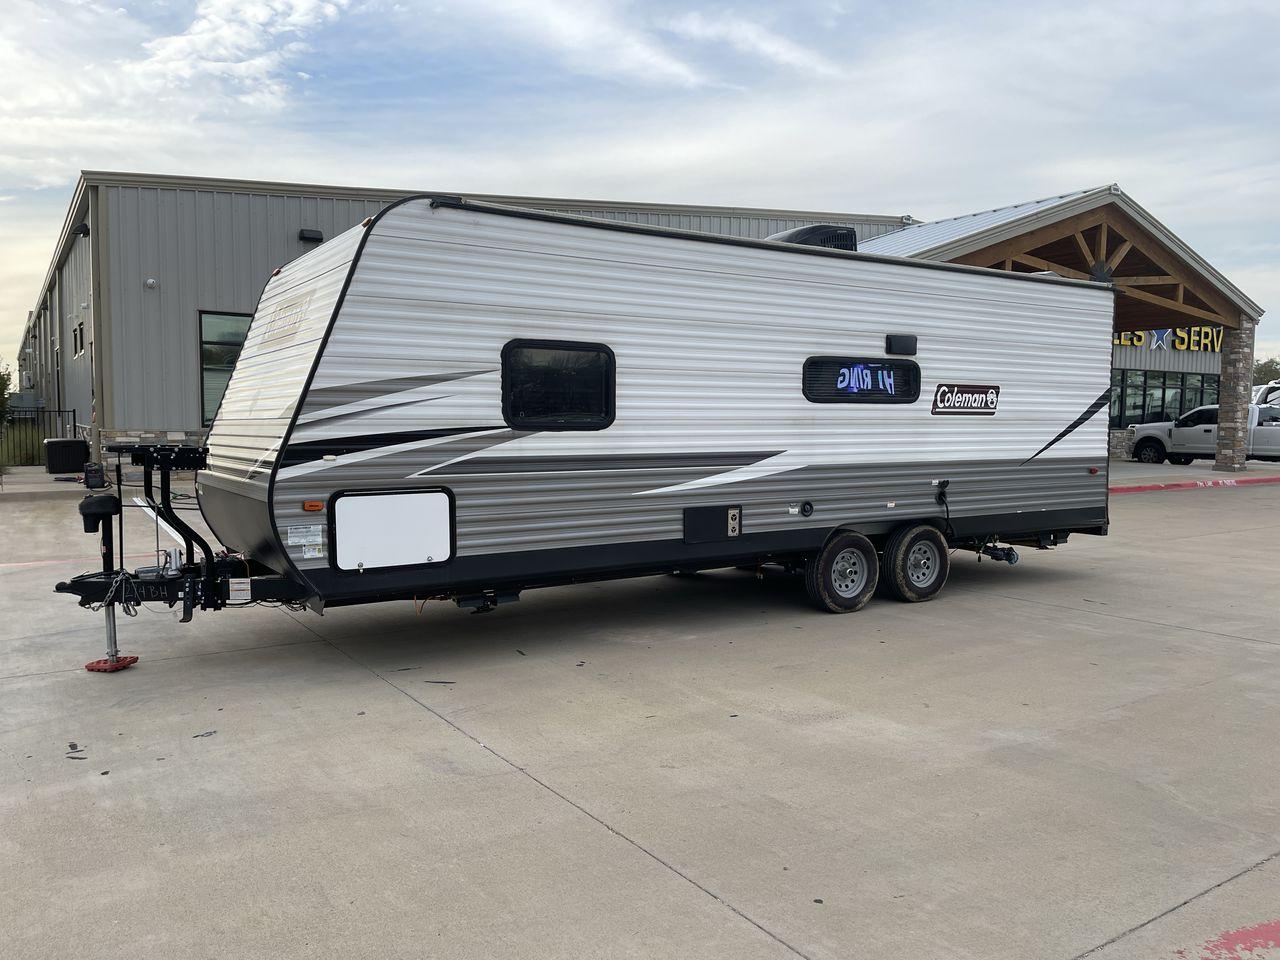 2021 WHITE KEYSTONE COLEMAN 274BH (4YDT27429MH) , Length: 28.58 ft. | Dry Weight: 4,789 lbs. | Slides: 0 transmission, located at 4319 N Main St, Cleburne, TX, 76033, (817) 678-5133, 32.385960, -97.391212 - Set out on an adventure-filled, comfortable journey in the 2021 Keystone Coleman 274BH travel trailer. Families looking for a fun and memorable camping trip will love this well-designed and adaptable travel companion. The dimensions of this unit are 28.58 ft in length, 8 ft in width, and 10.33 ft - Photo #23